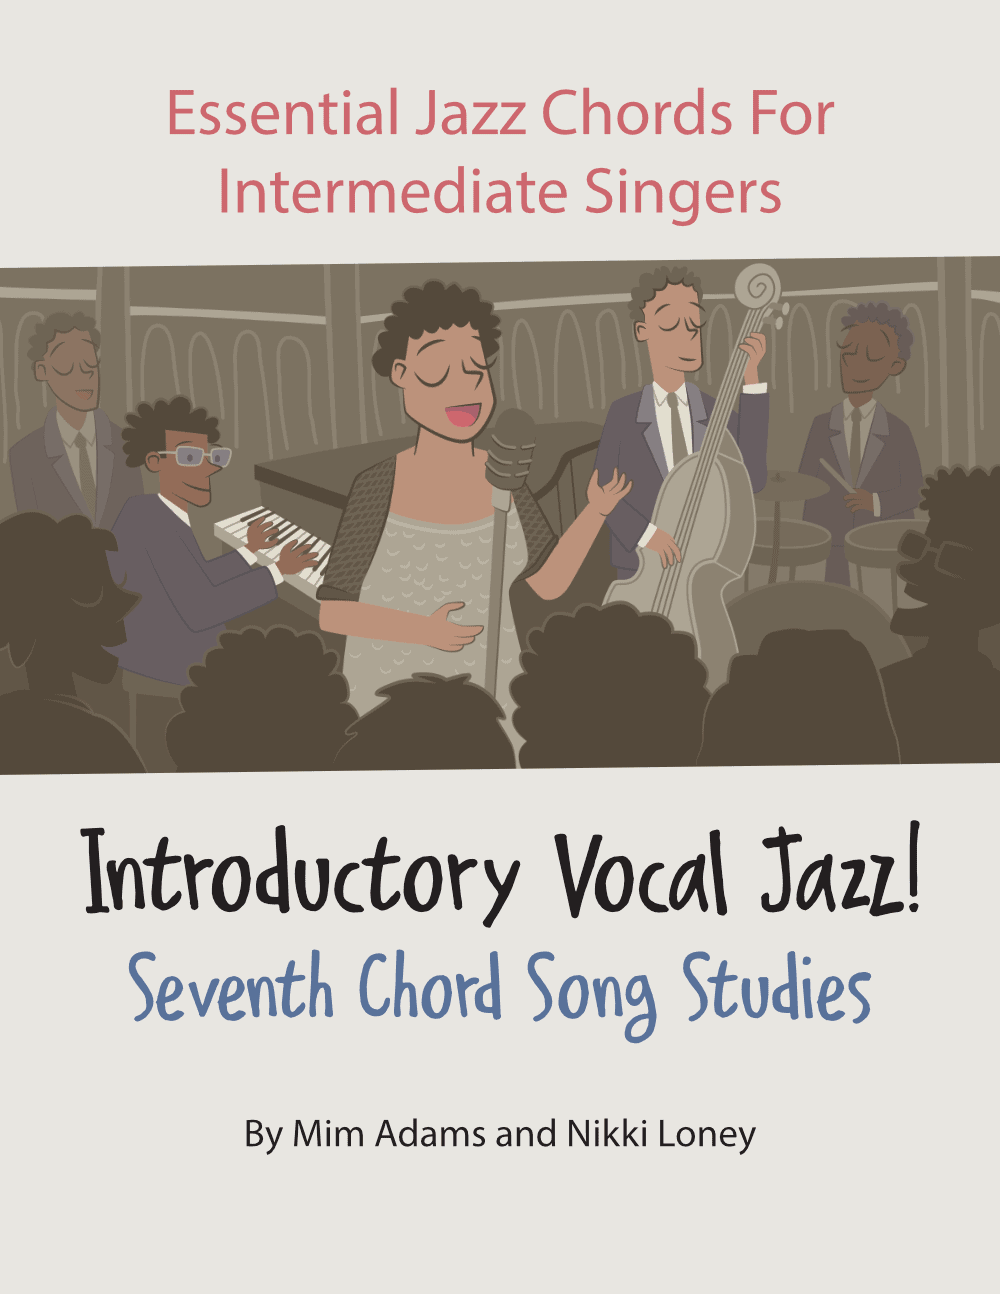 Introductory Vocal Jazz! Seventh Chord Song Studies